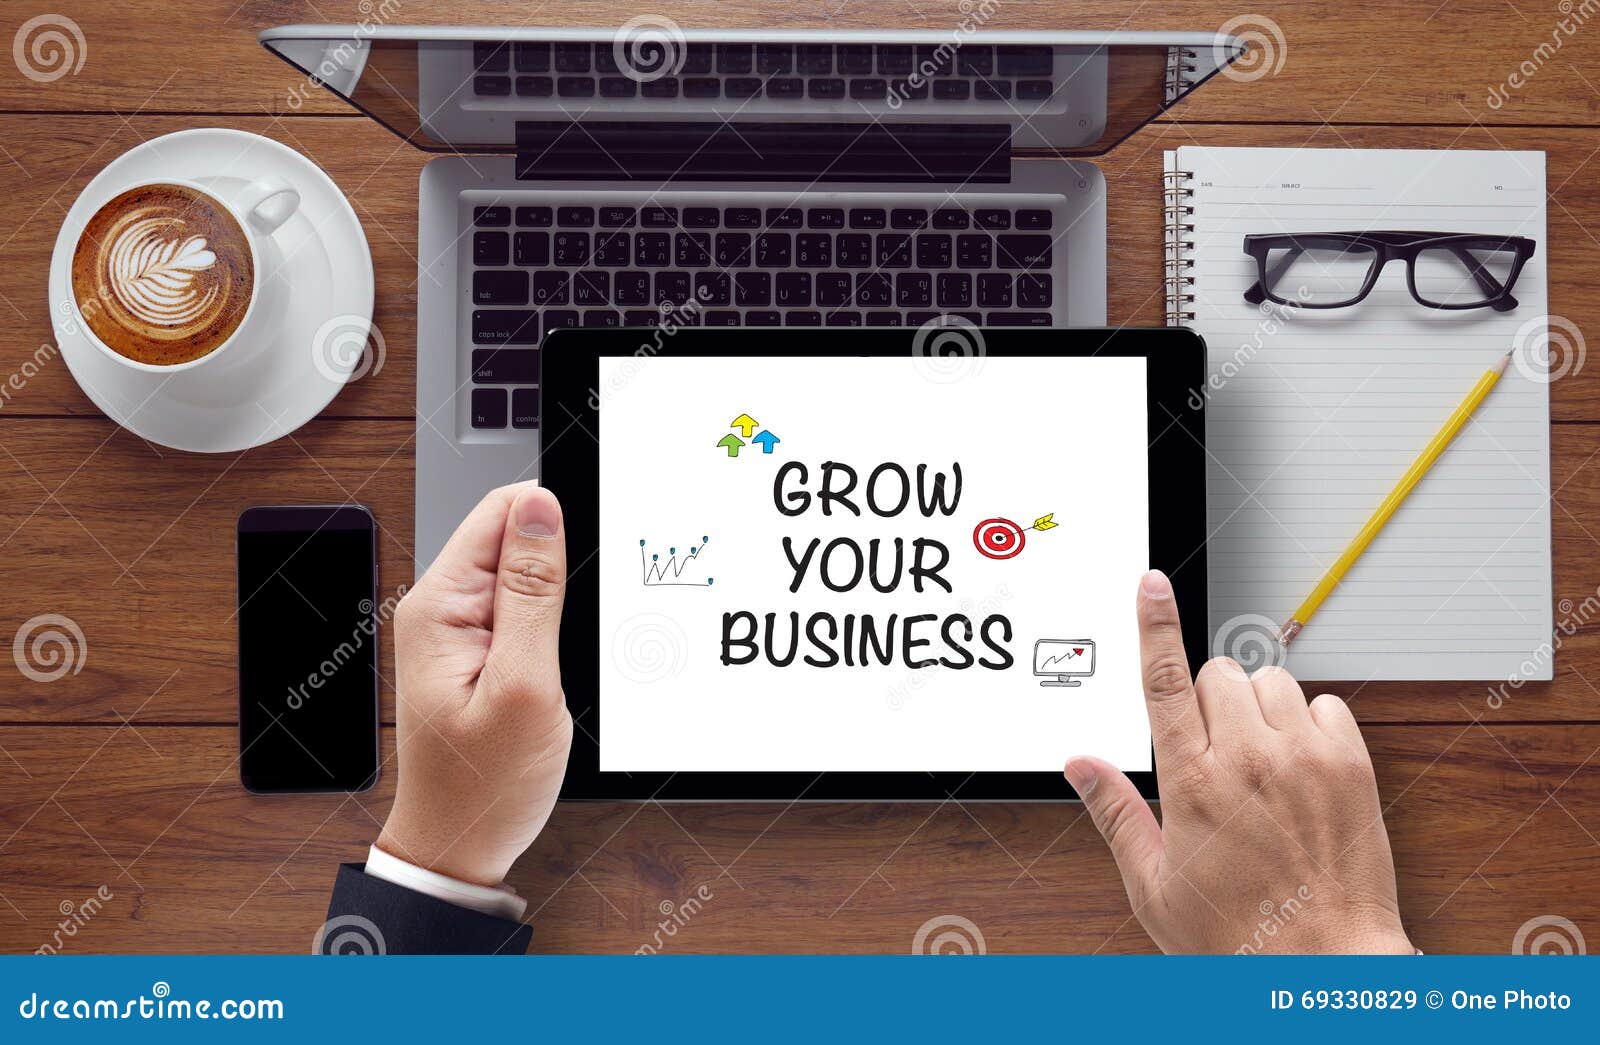 grow your business concept